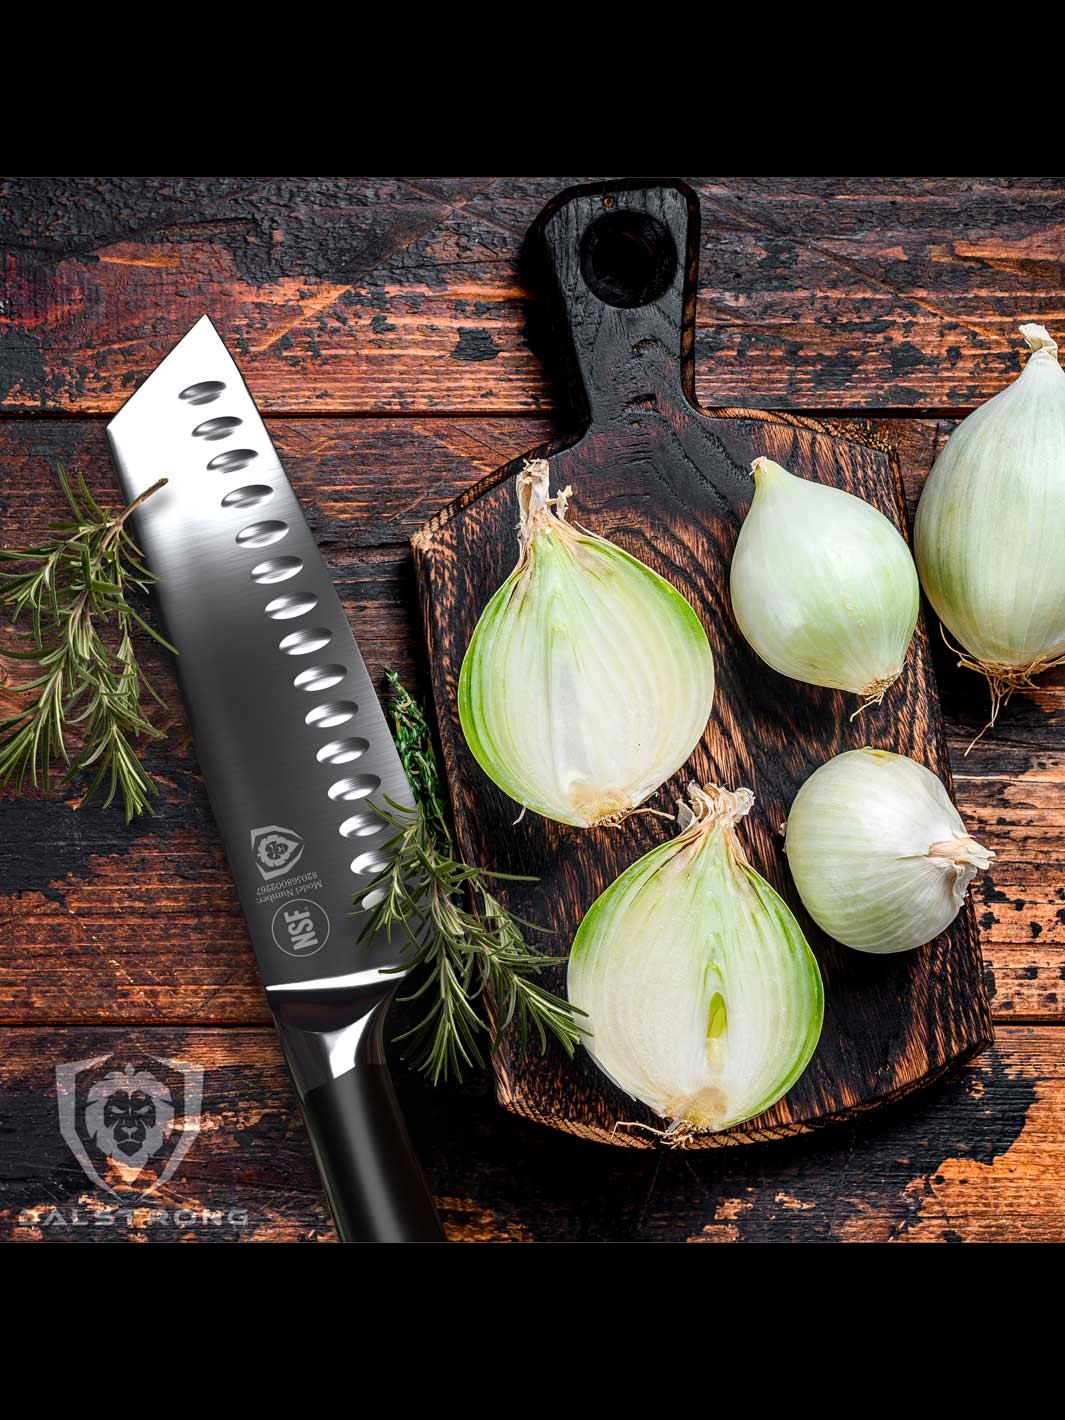 Dalstrong vanquish series 7 inch santoku knife with black handle and onions cut in half on a cutting board.